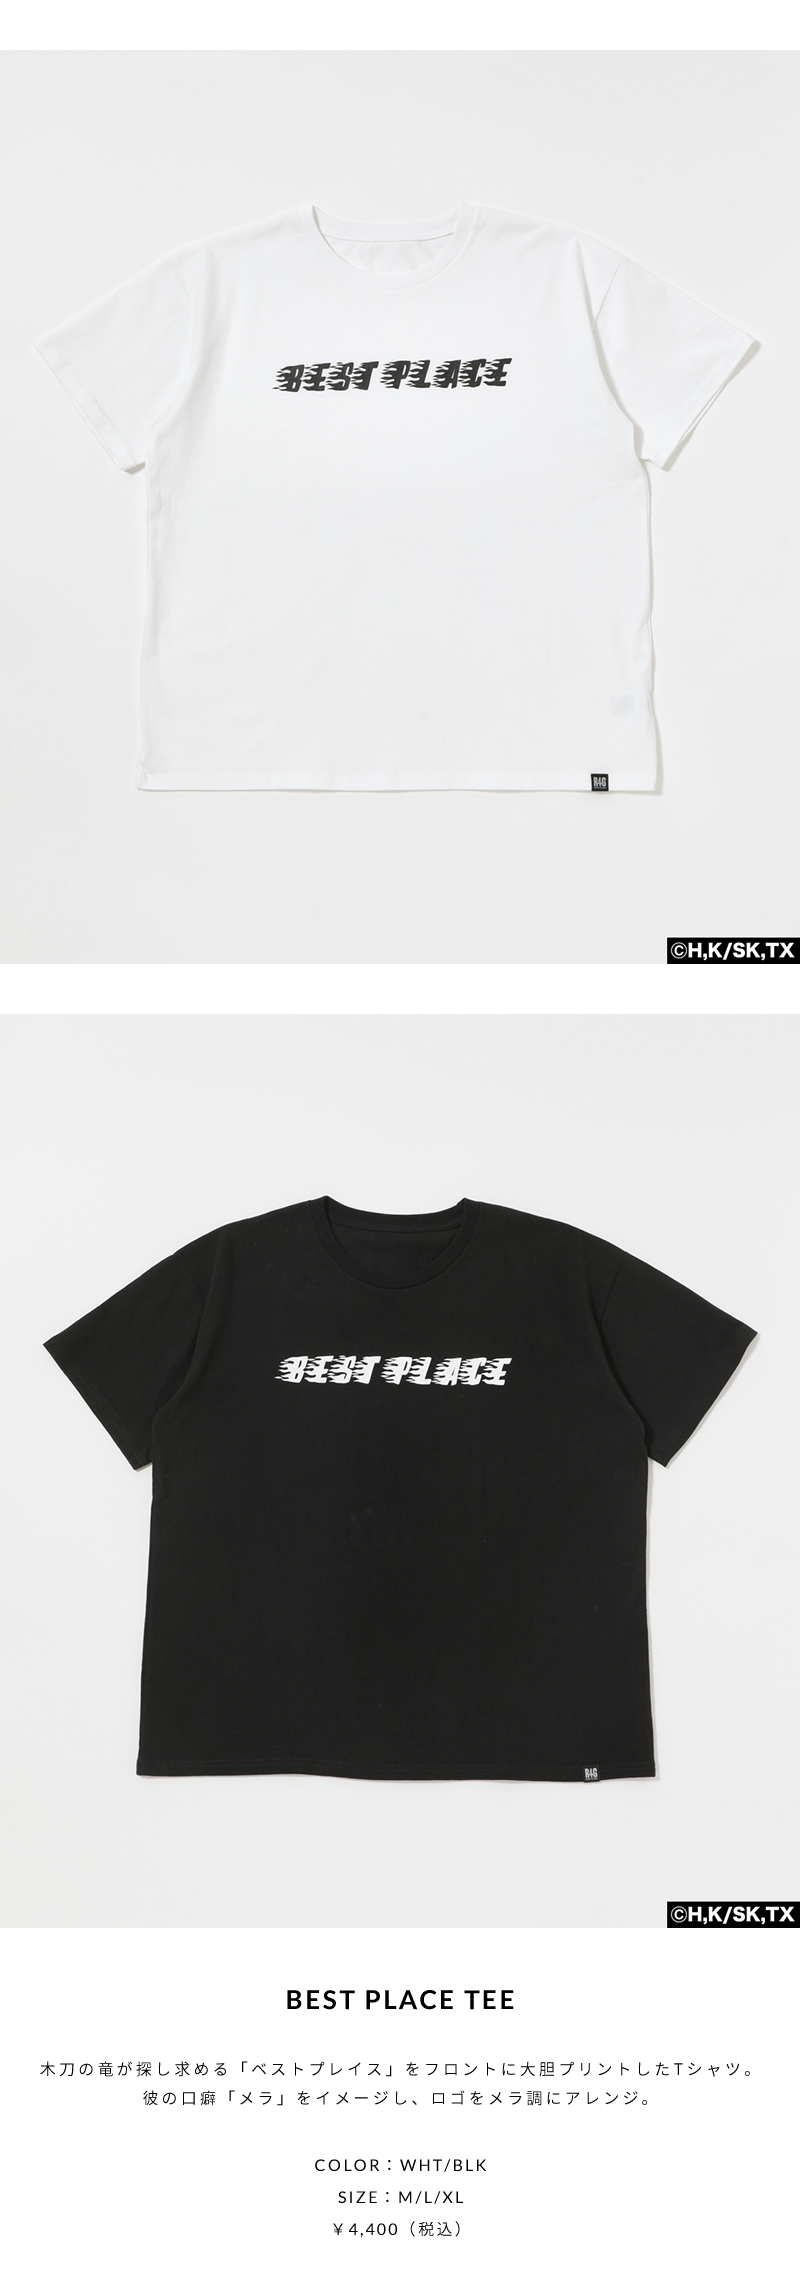 BEST PLACE TEE